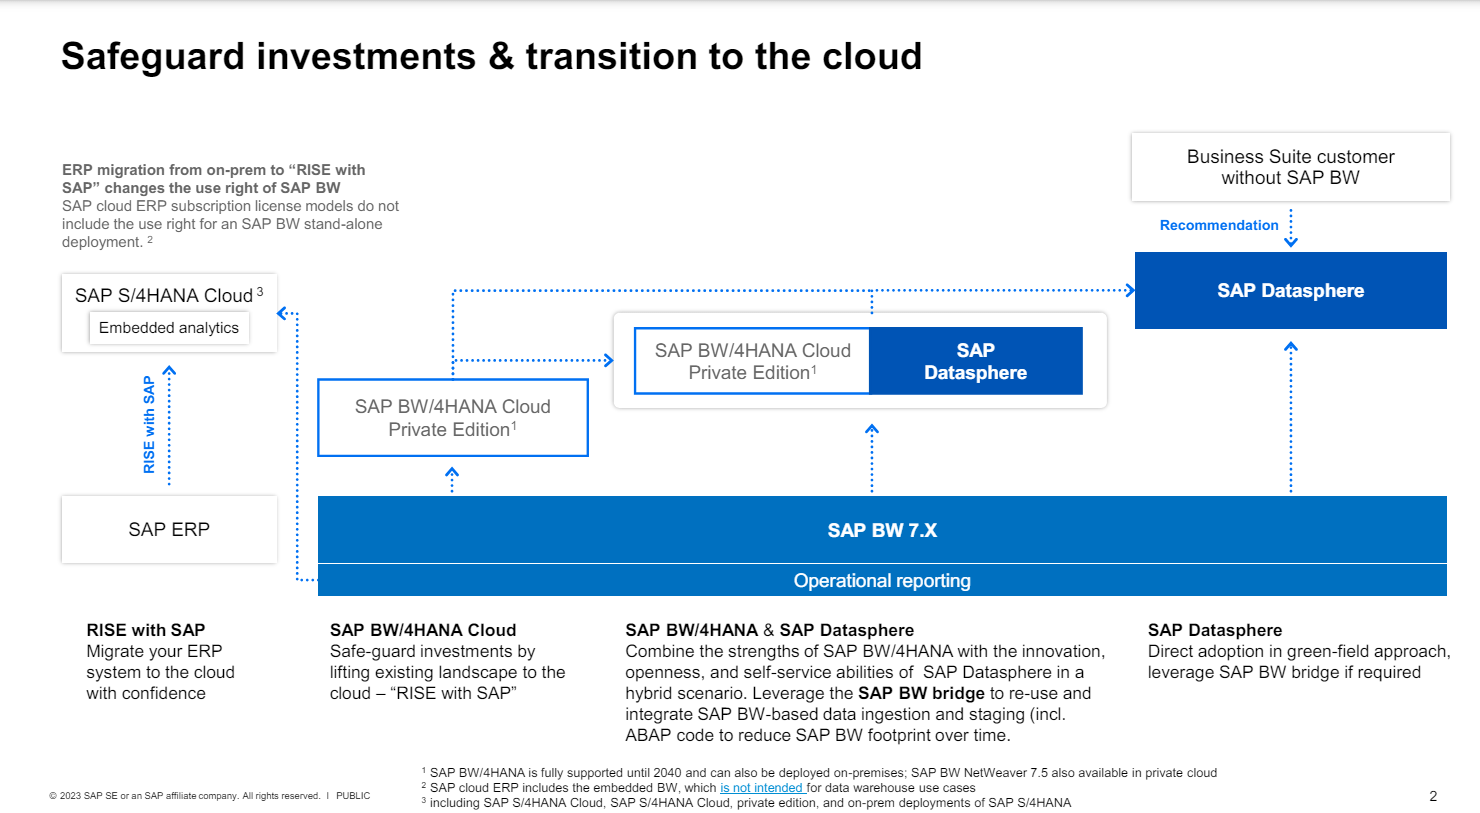 Transition to cloud